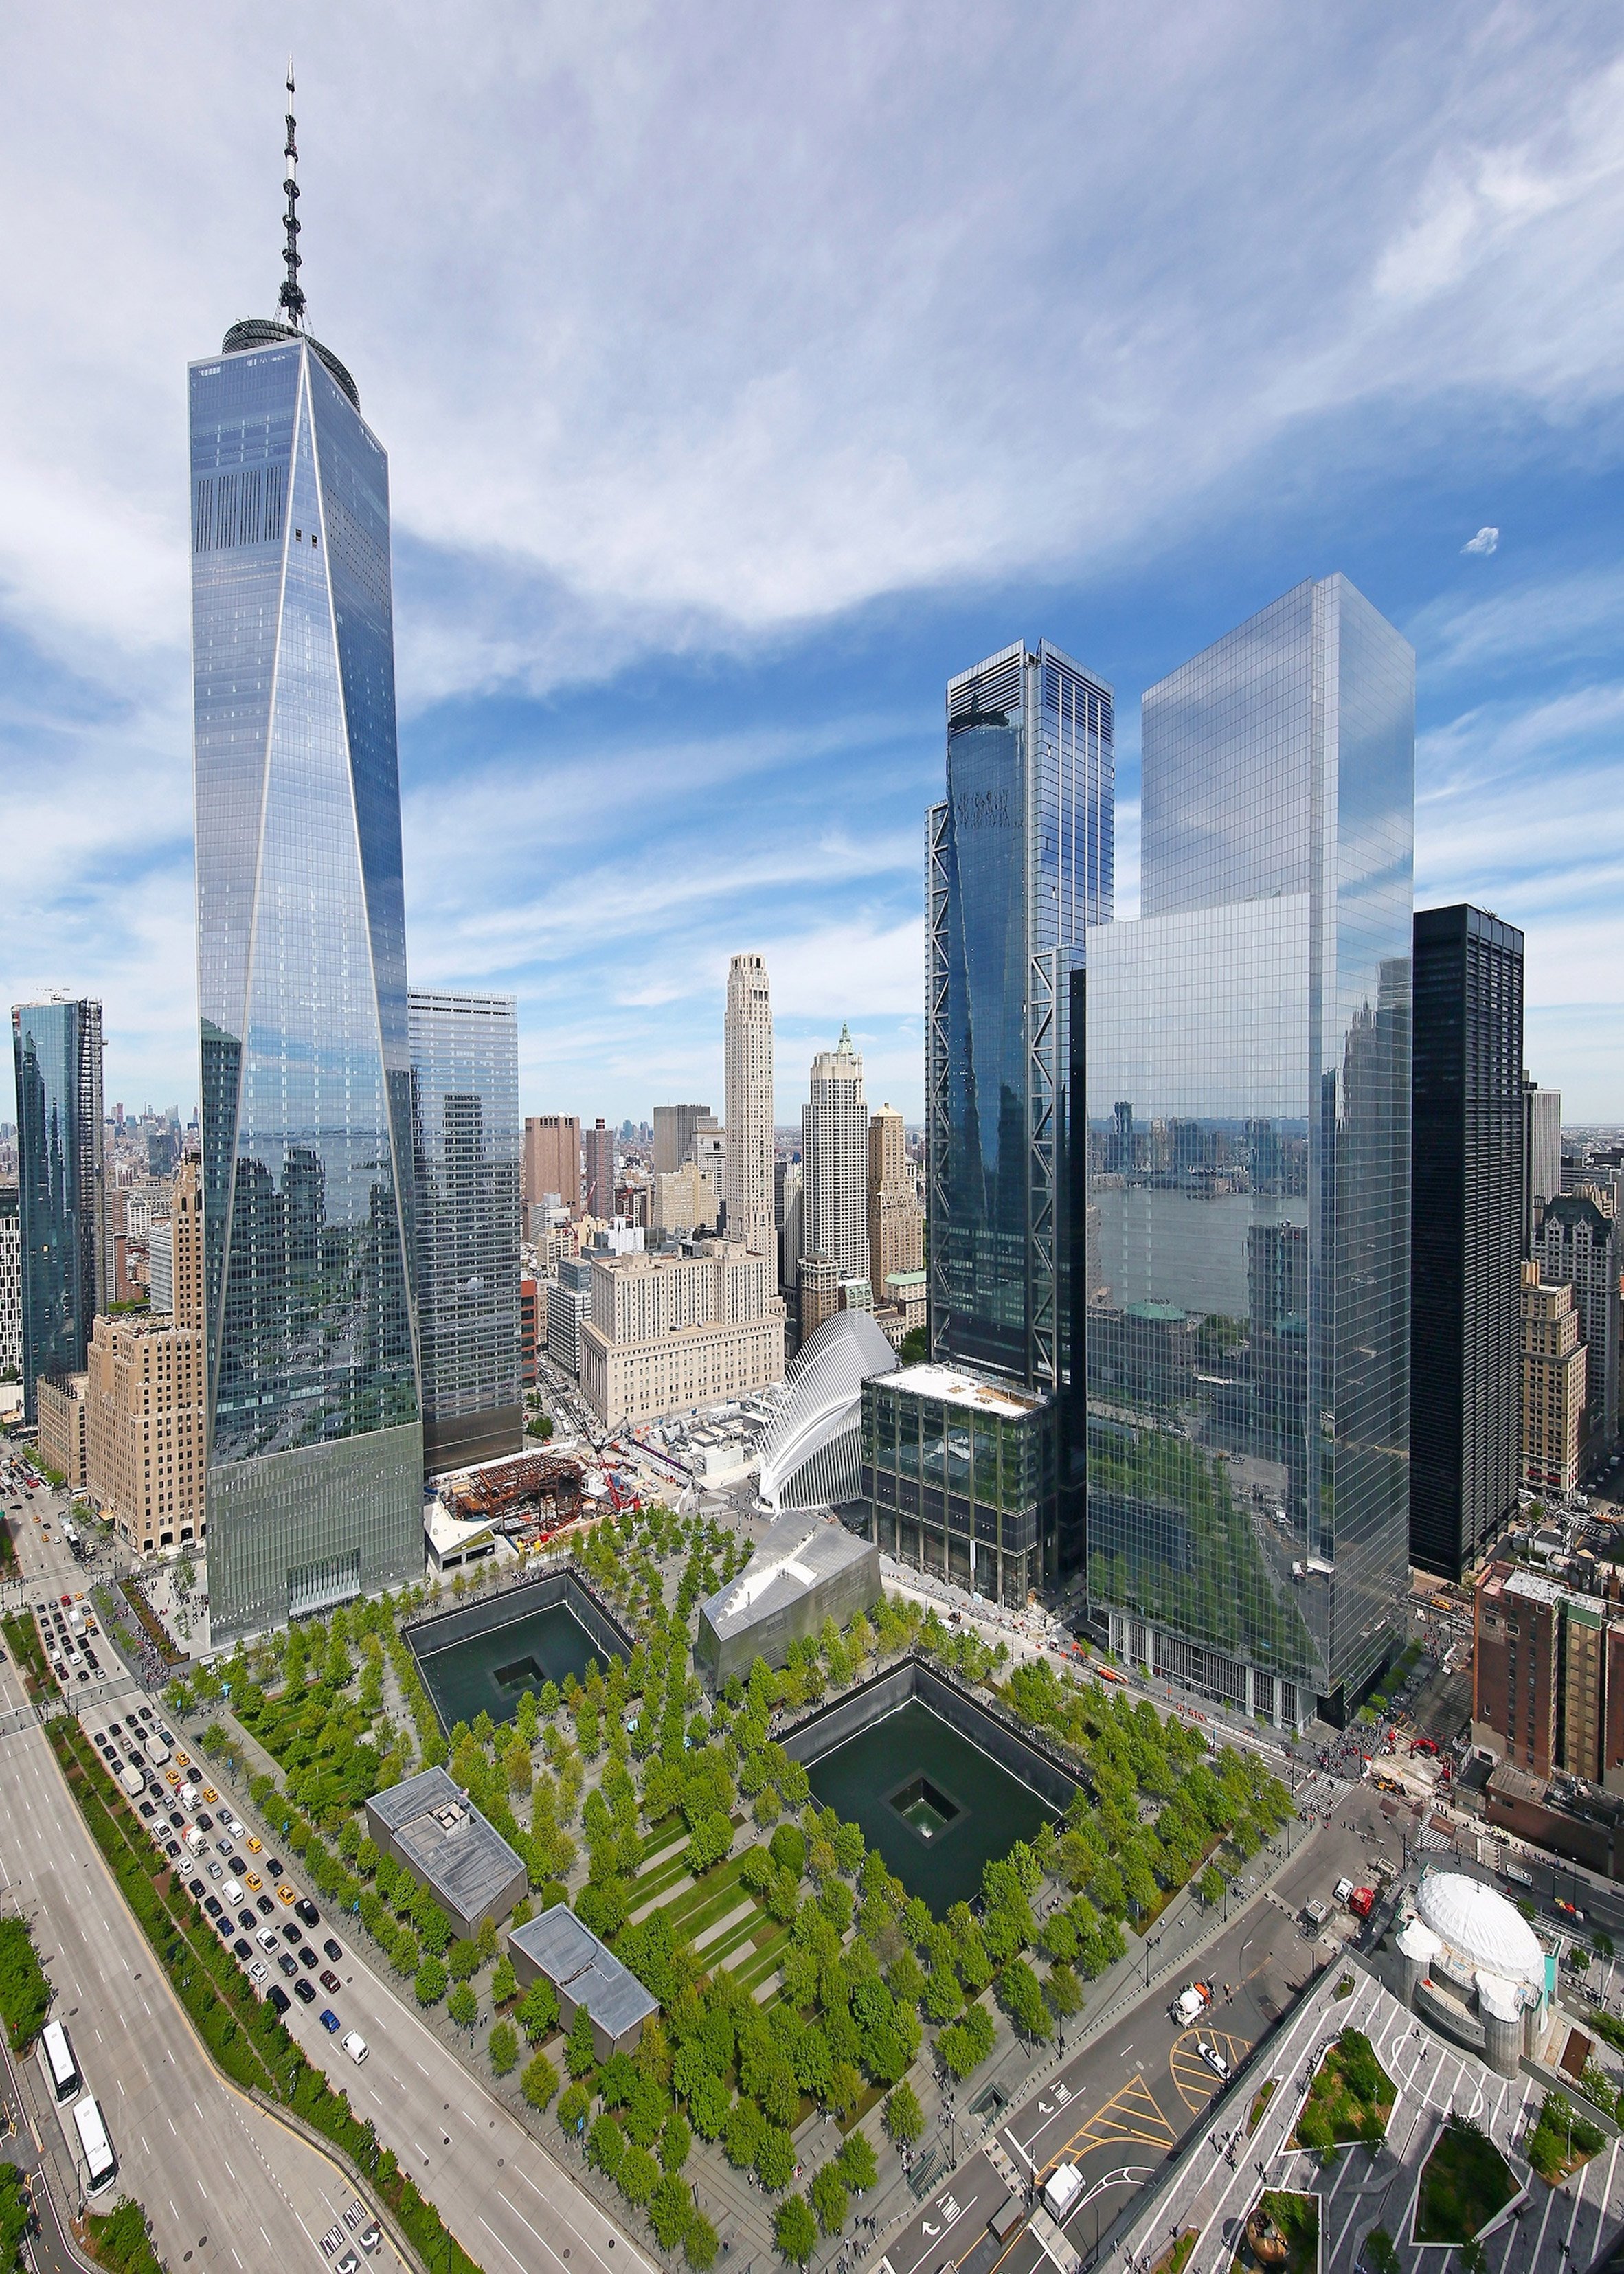 9/11 anniversary: how the World Trade Center site was rebuilt